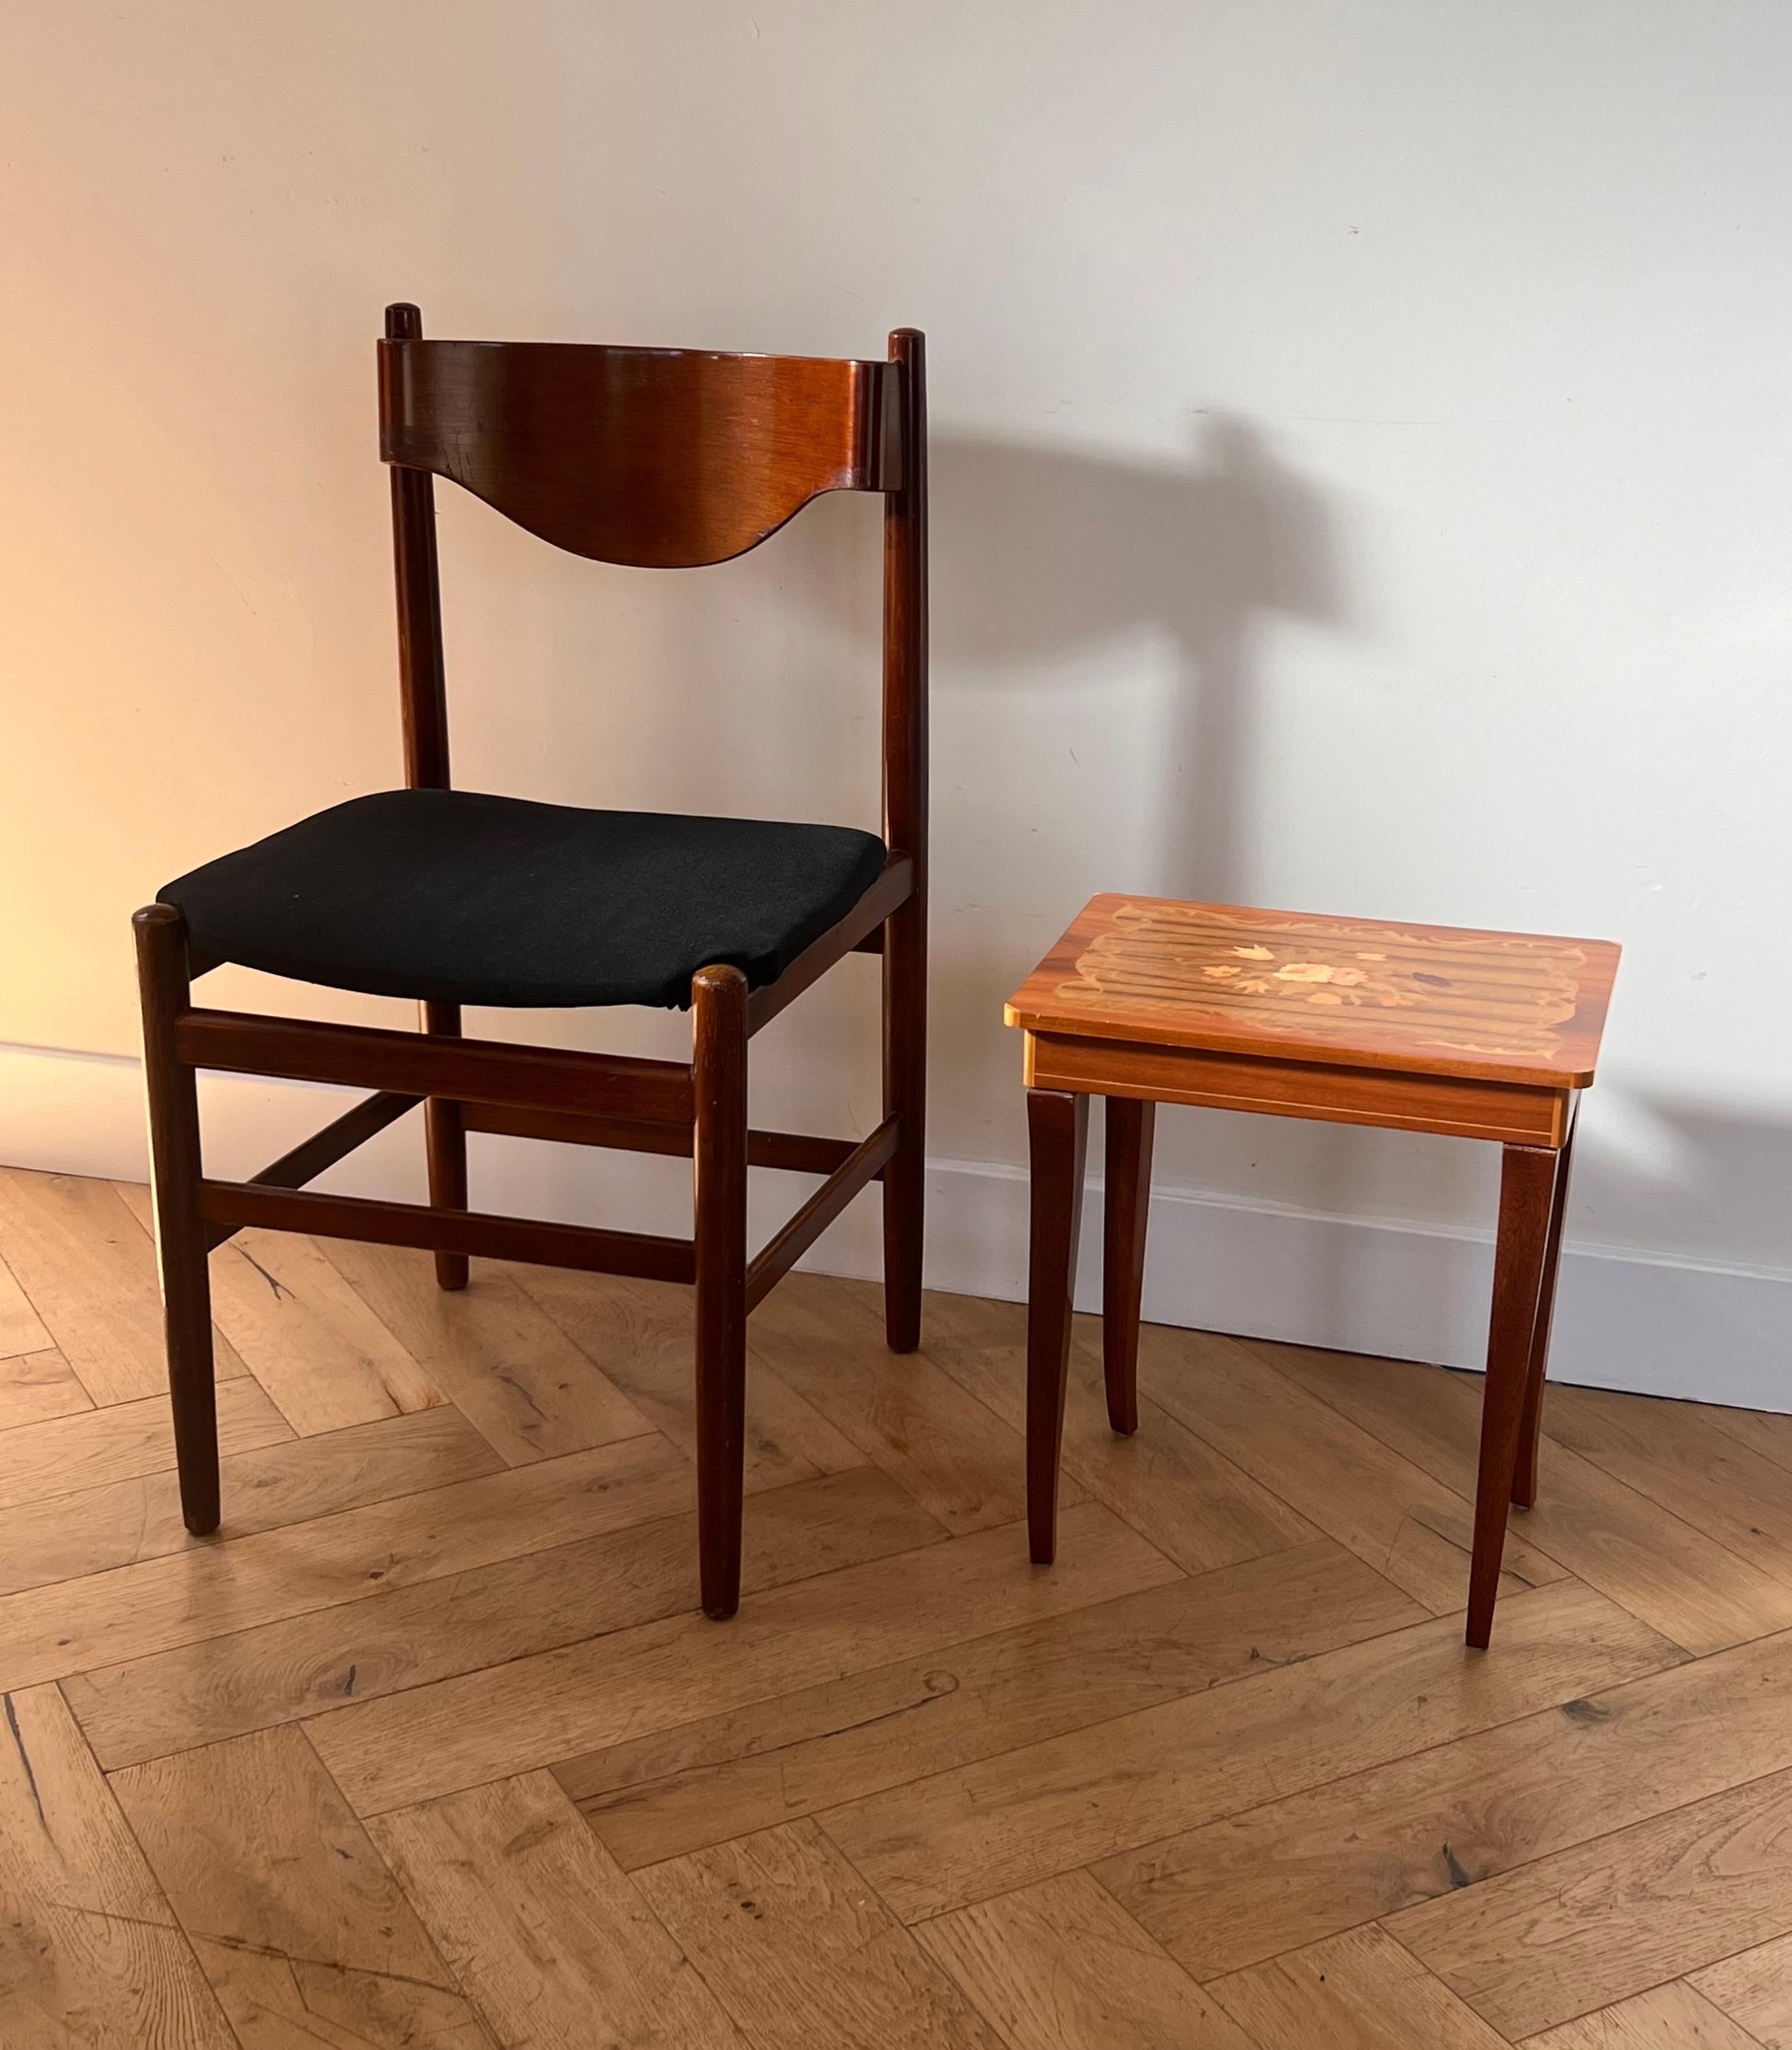 A Danish modern side chair by Borneo Int’l, 1960s. Frame is walnut and the upholstery is a licorice-hued cotton. The back rest of the chair is bent into a wonderfully unique undulating pattern. Commerce CA via Denmark. Original label intact. Wear